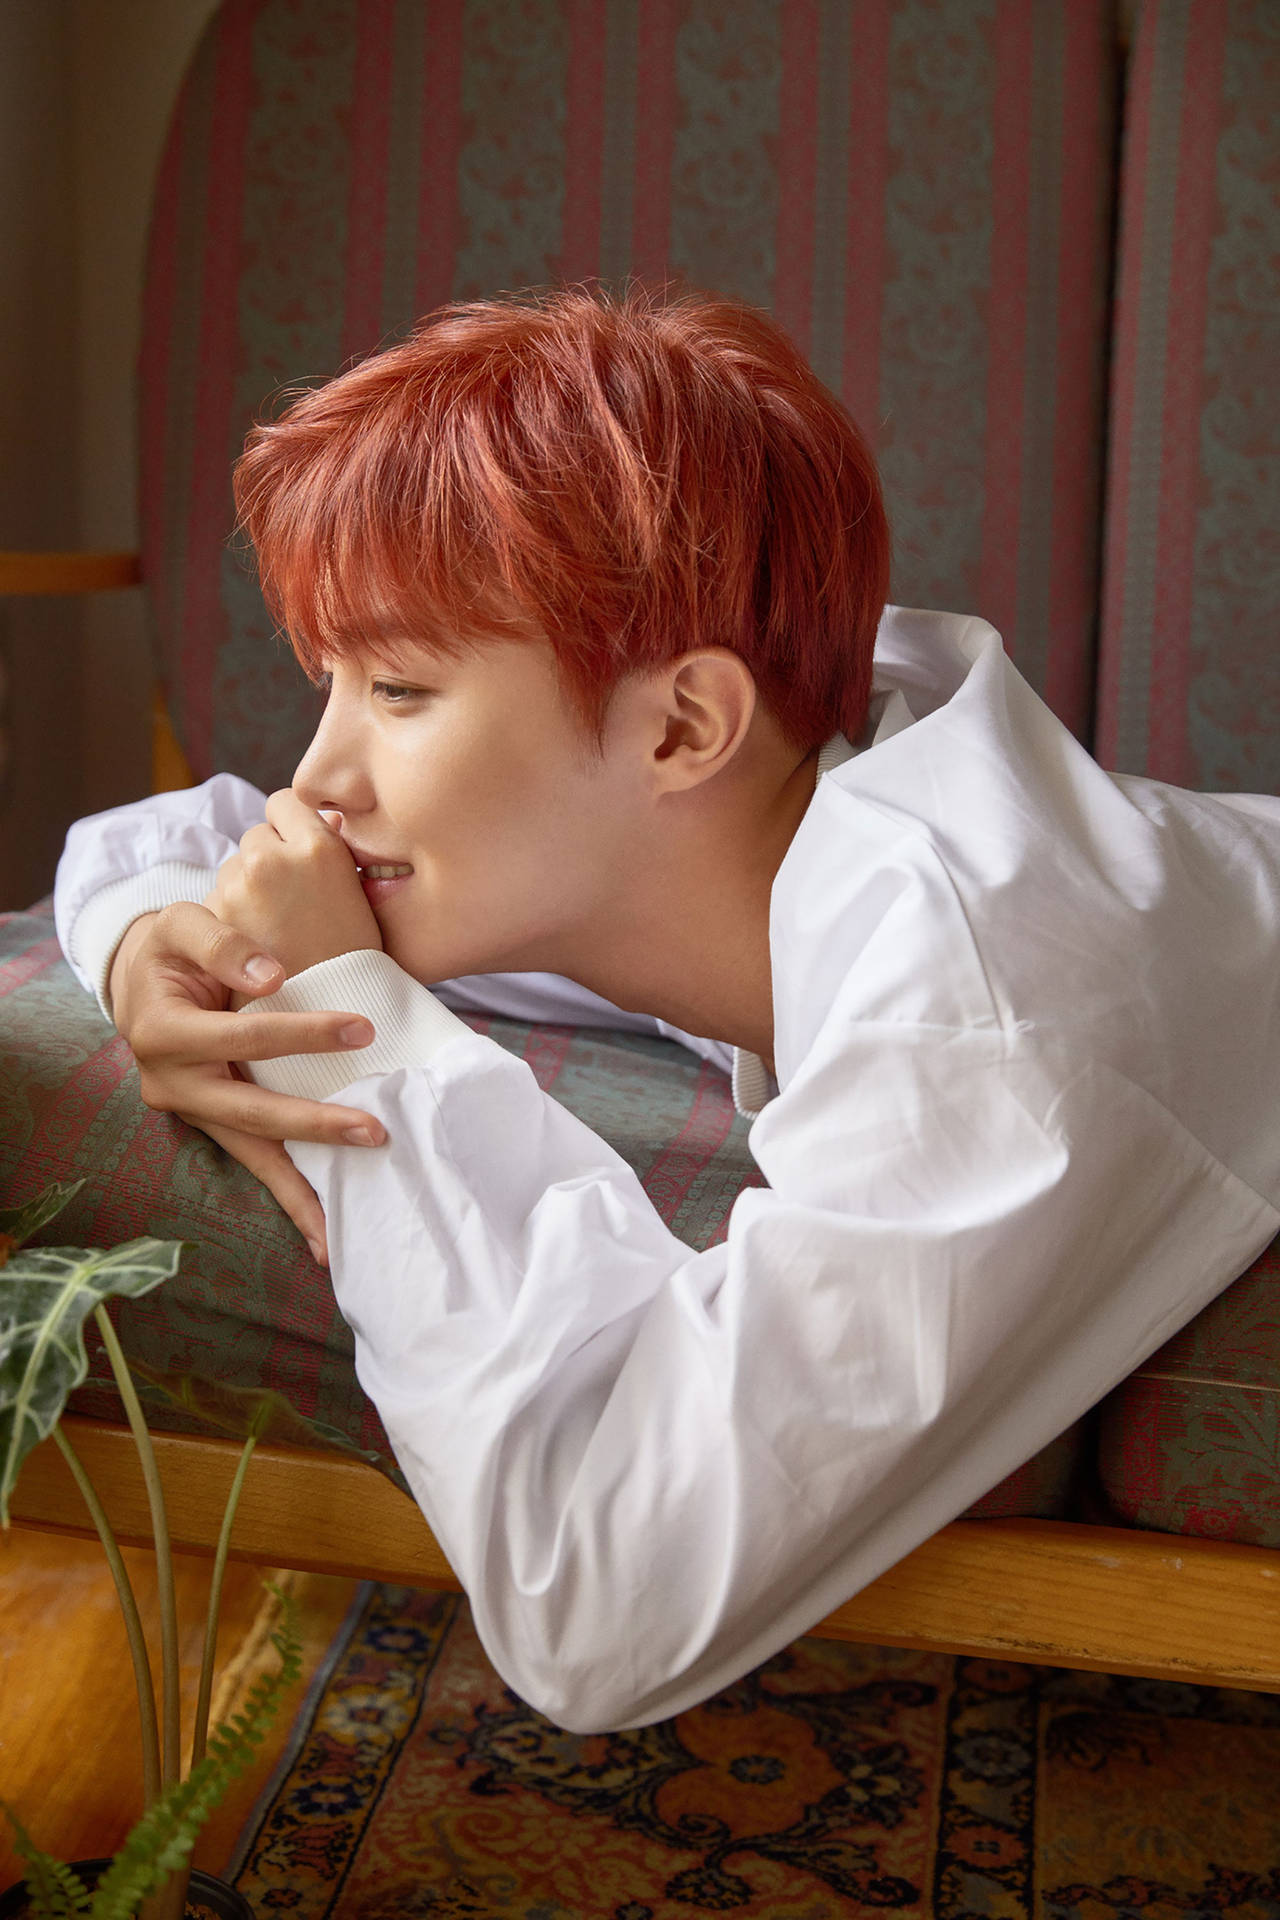 J-hope In Red Hair Background